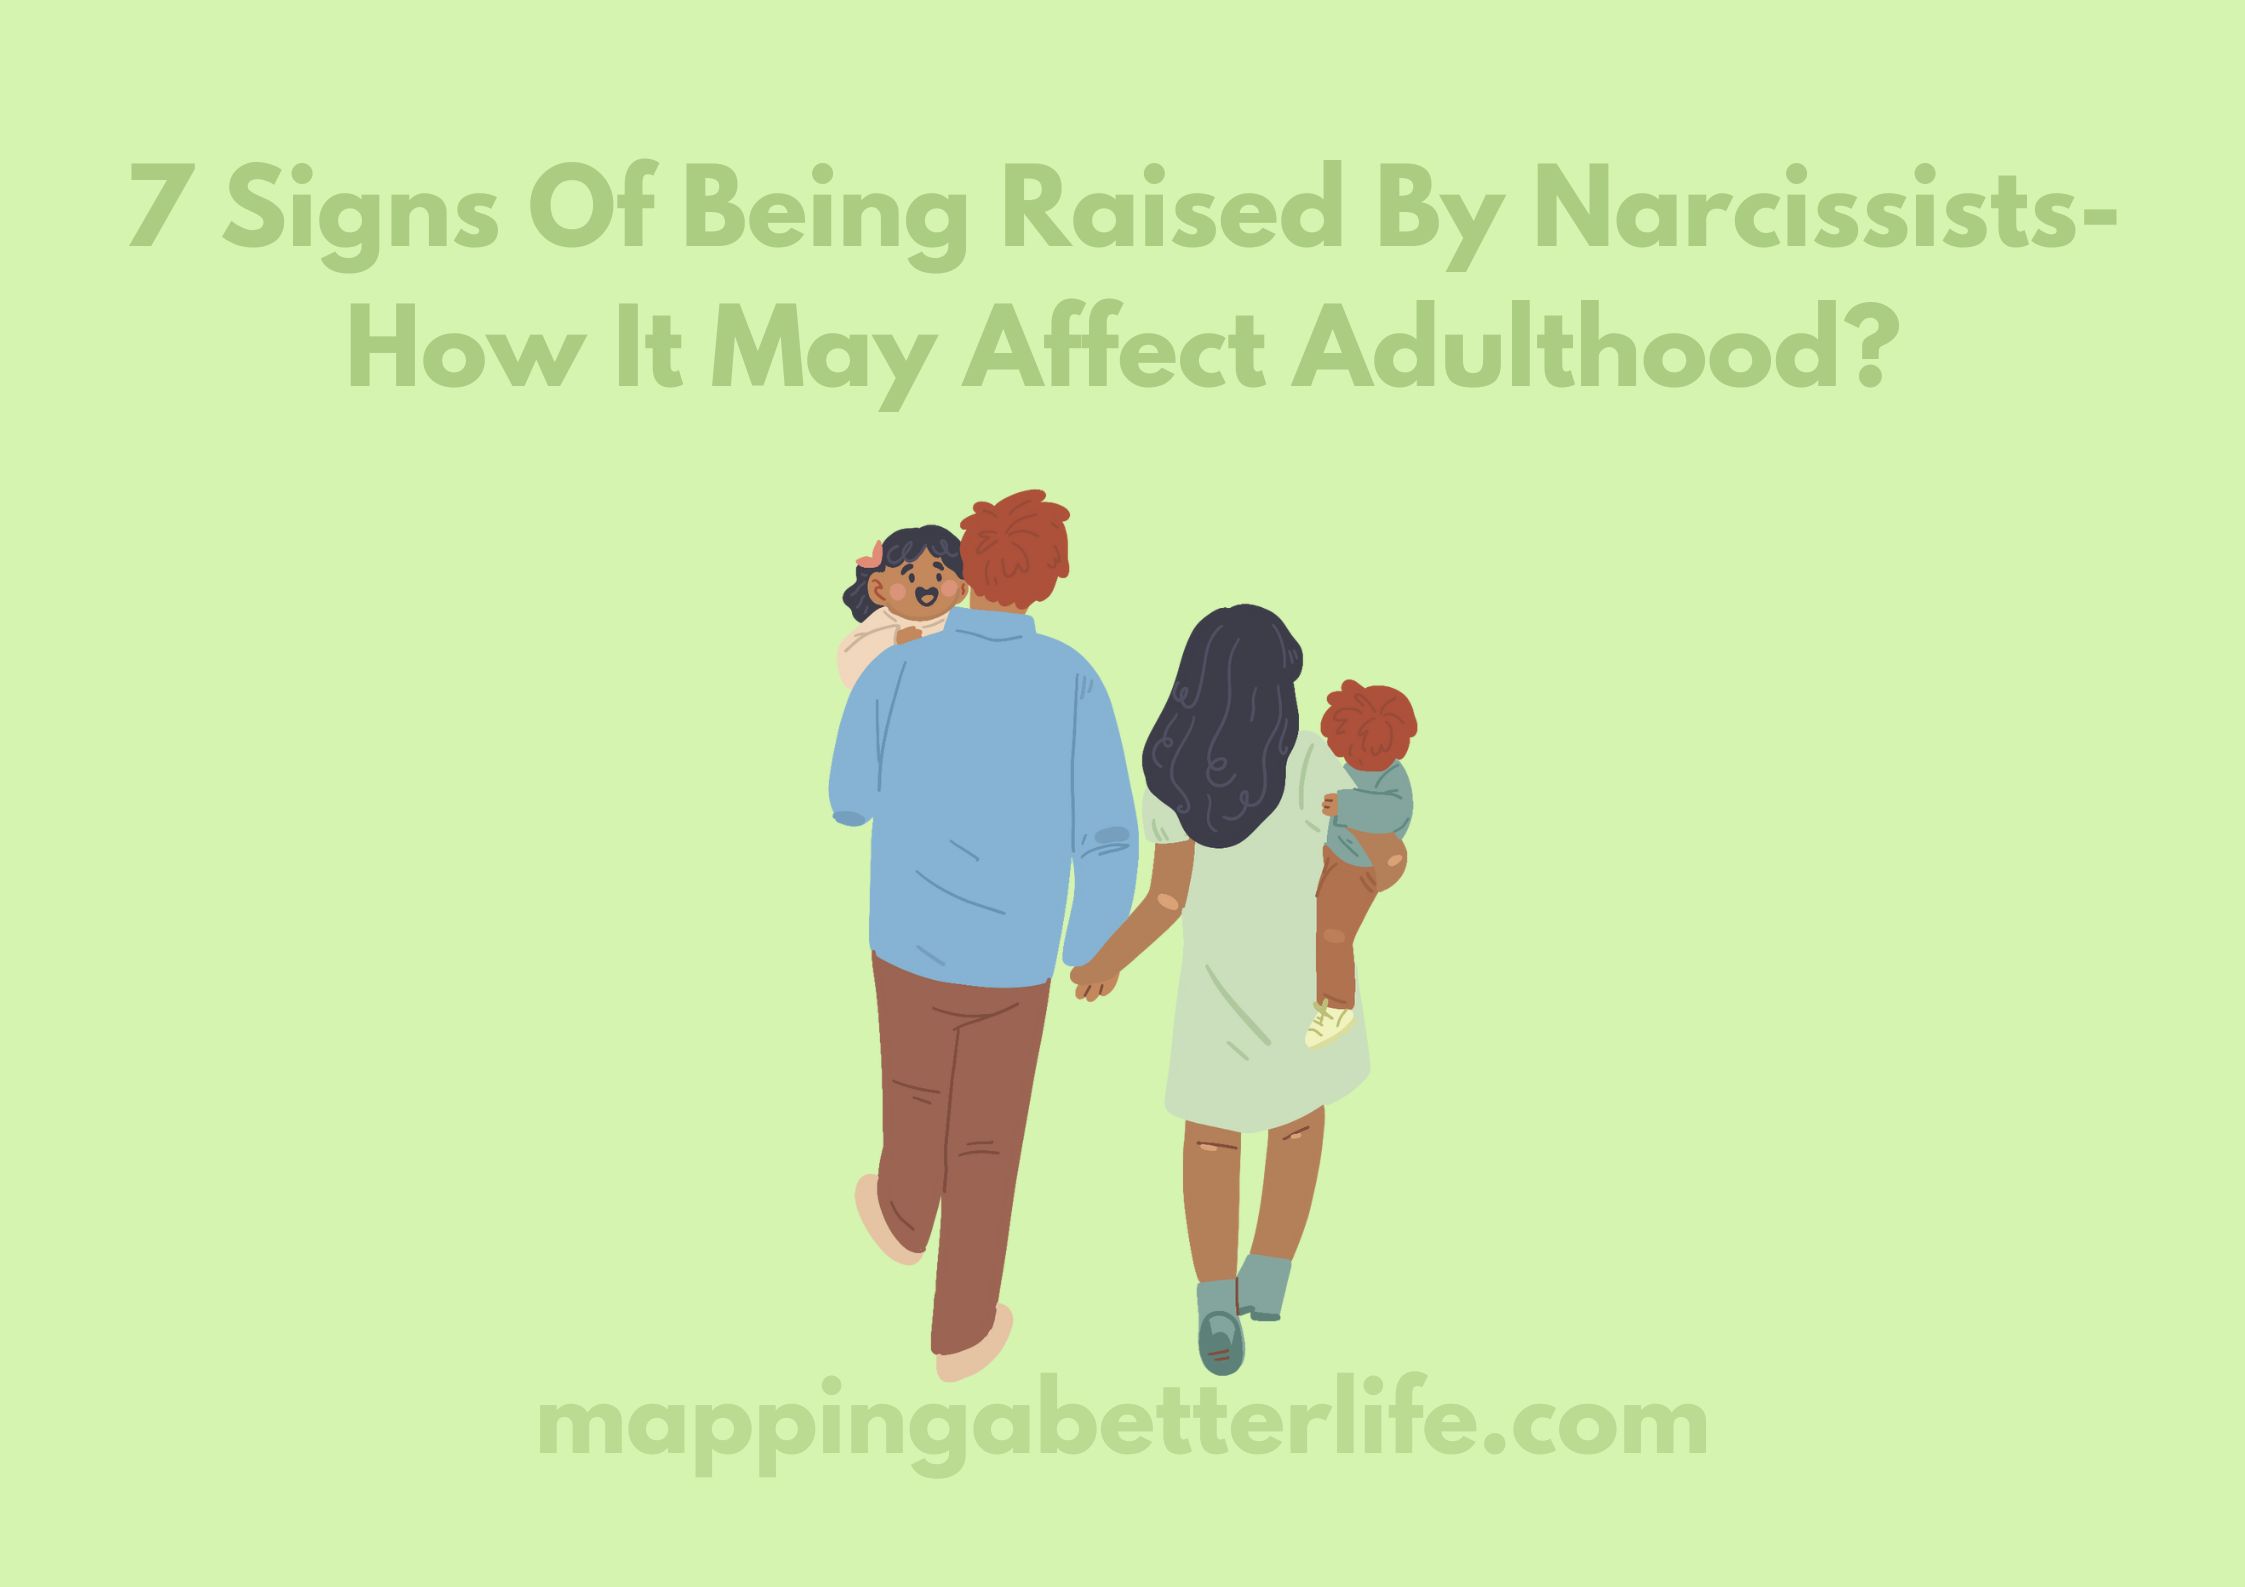 7 Signs Of Being Raised By Narcissists- How It May Affect Adulthood?